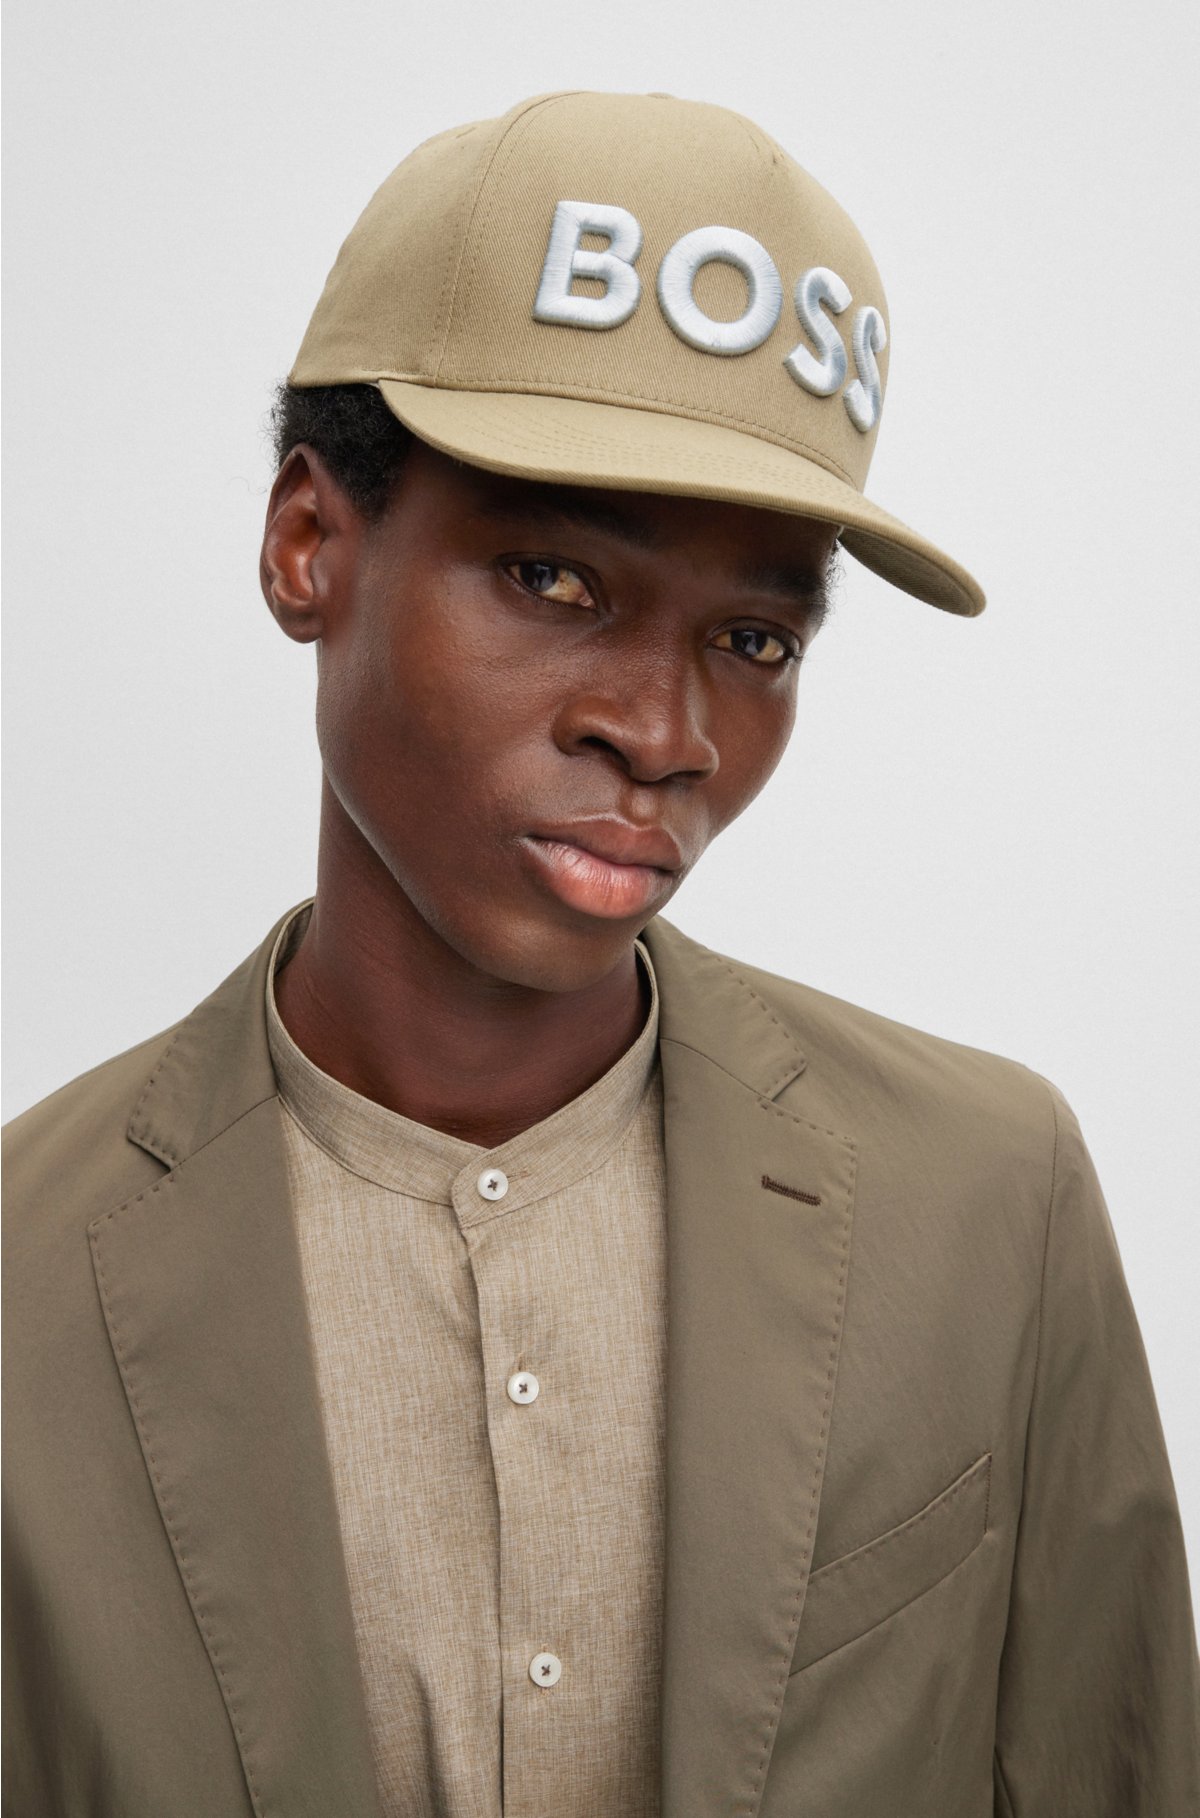 Cotton-twill embroidered - adjustable BOSS strap cap logo with and